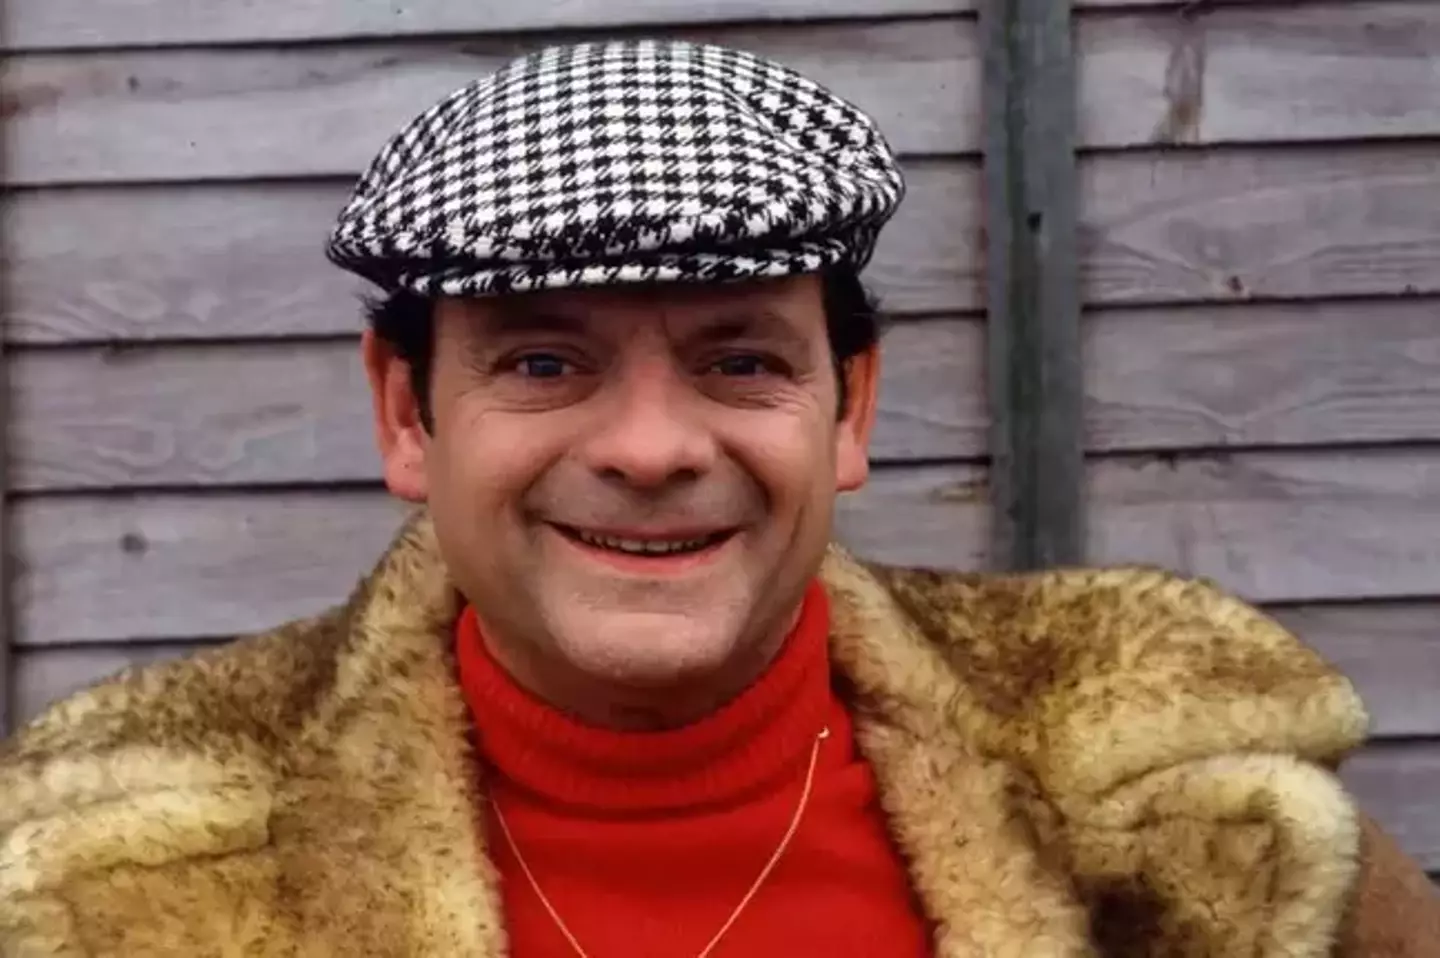 Jason starred in Only Fools and Horses as Derek 'Del Boy' Trotter.